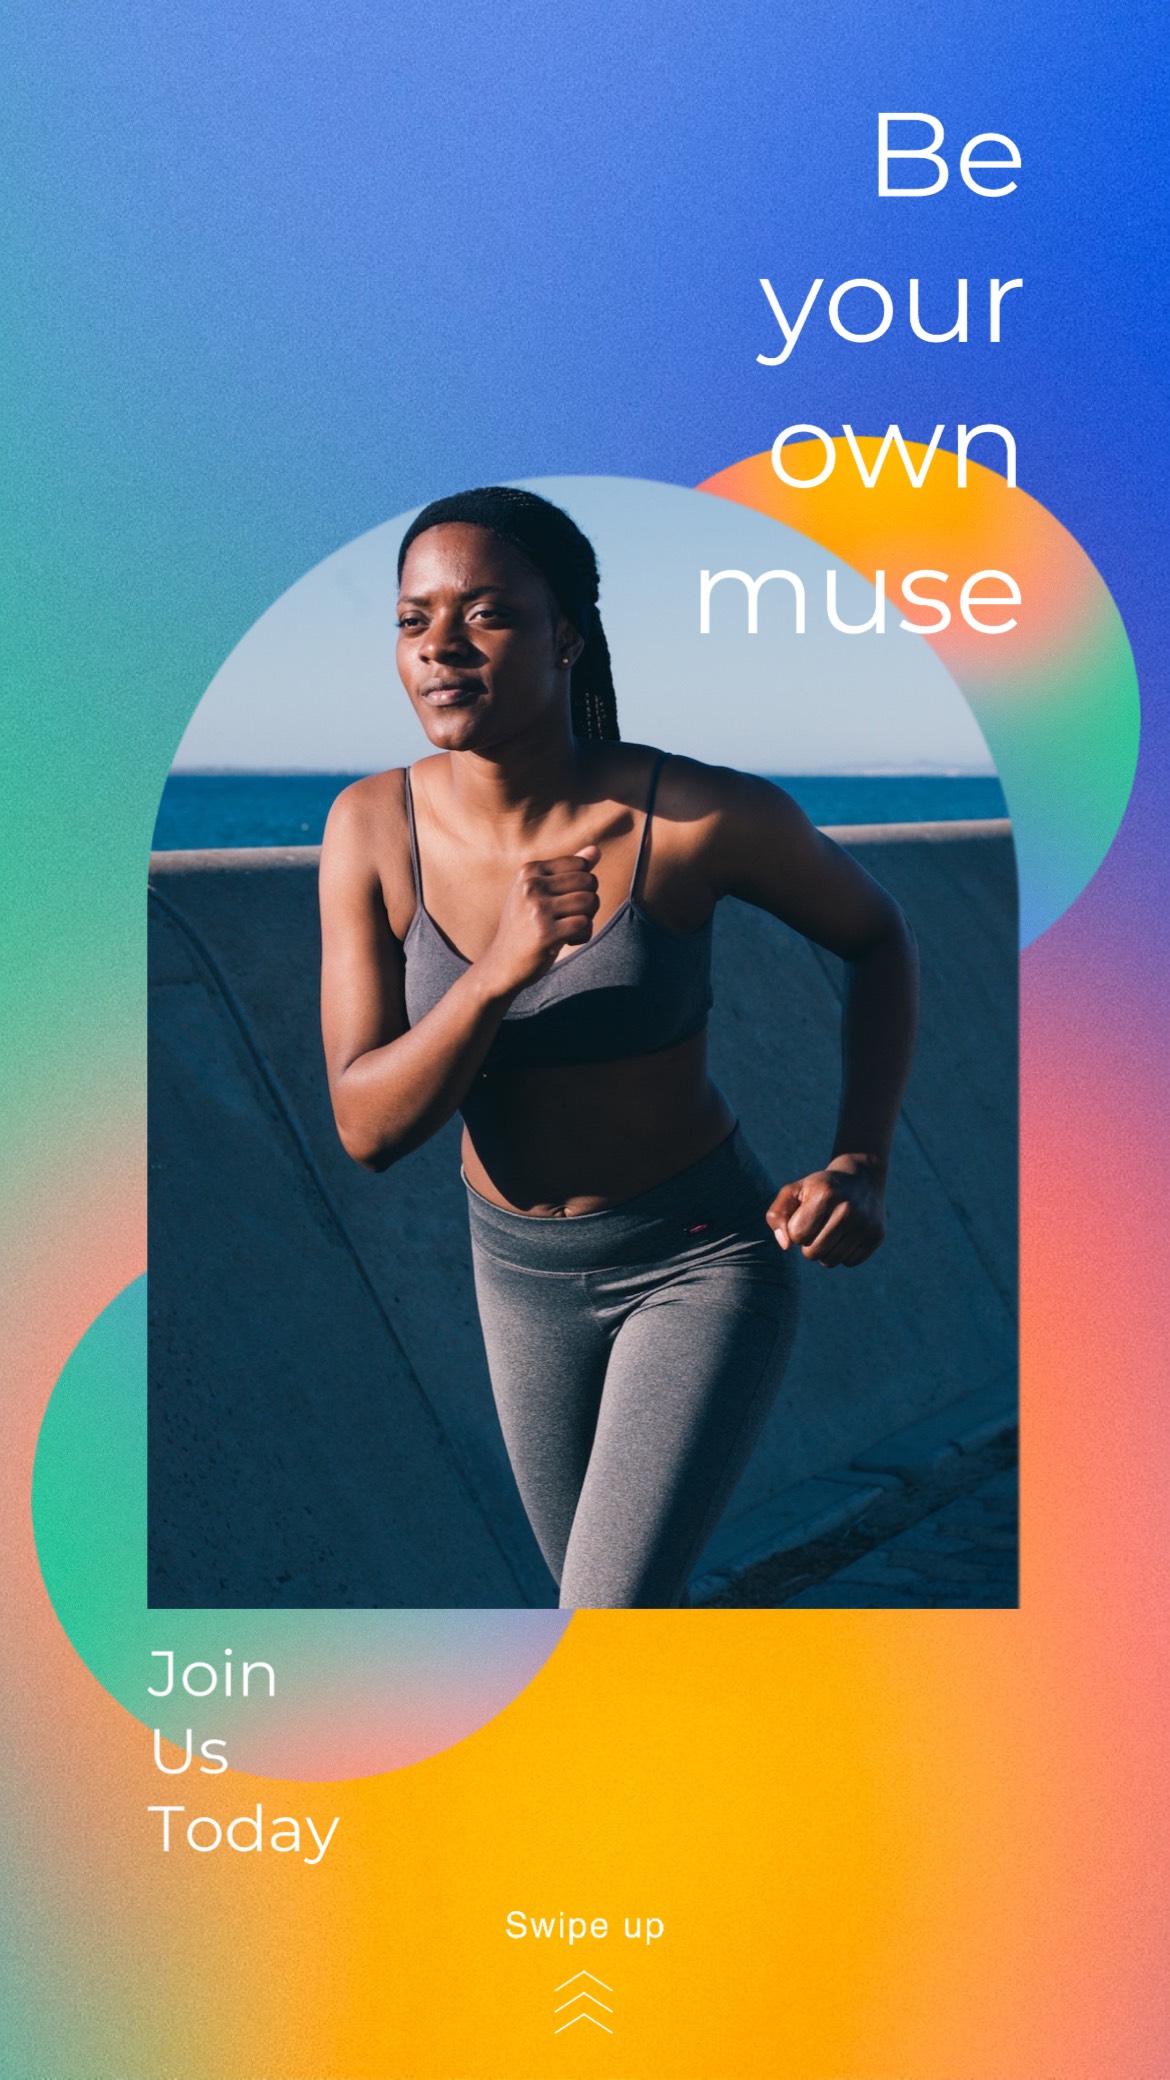 Be your own muse workout instagram story template